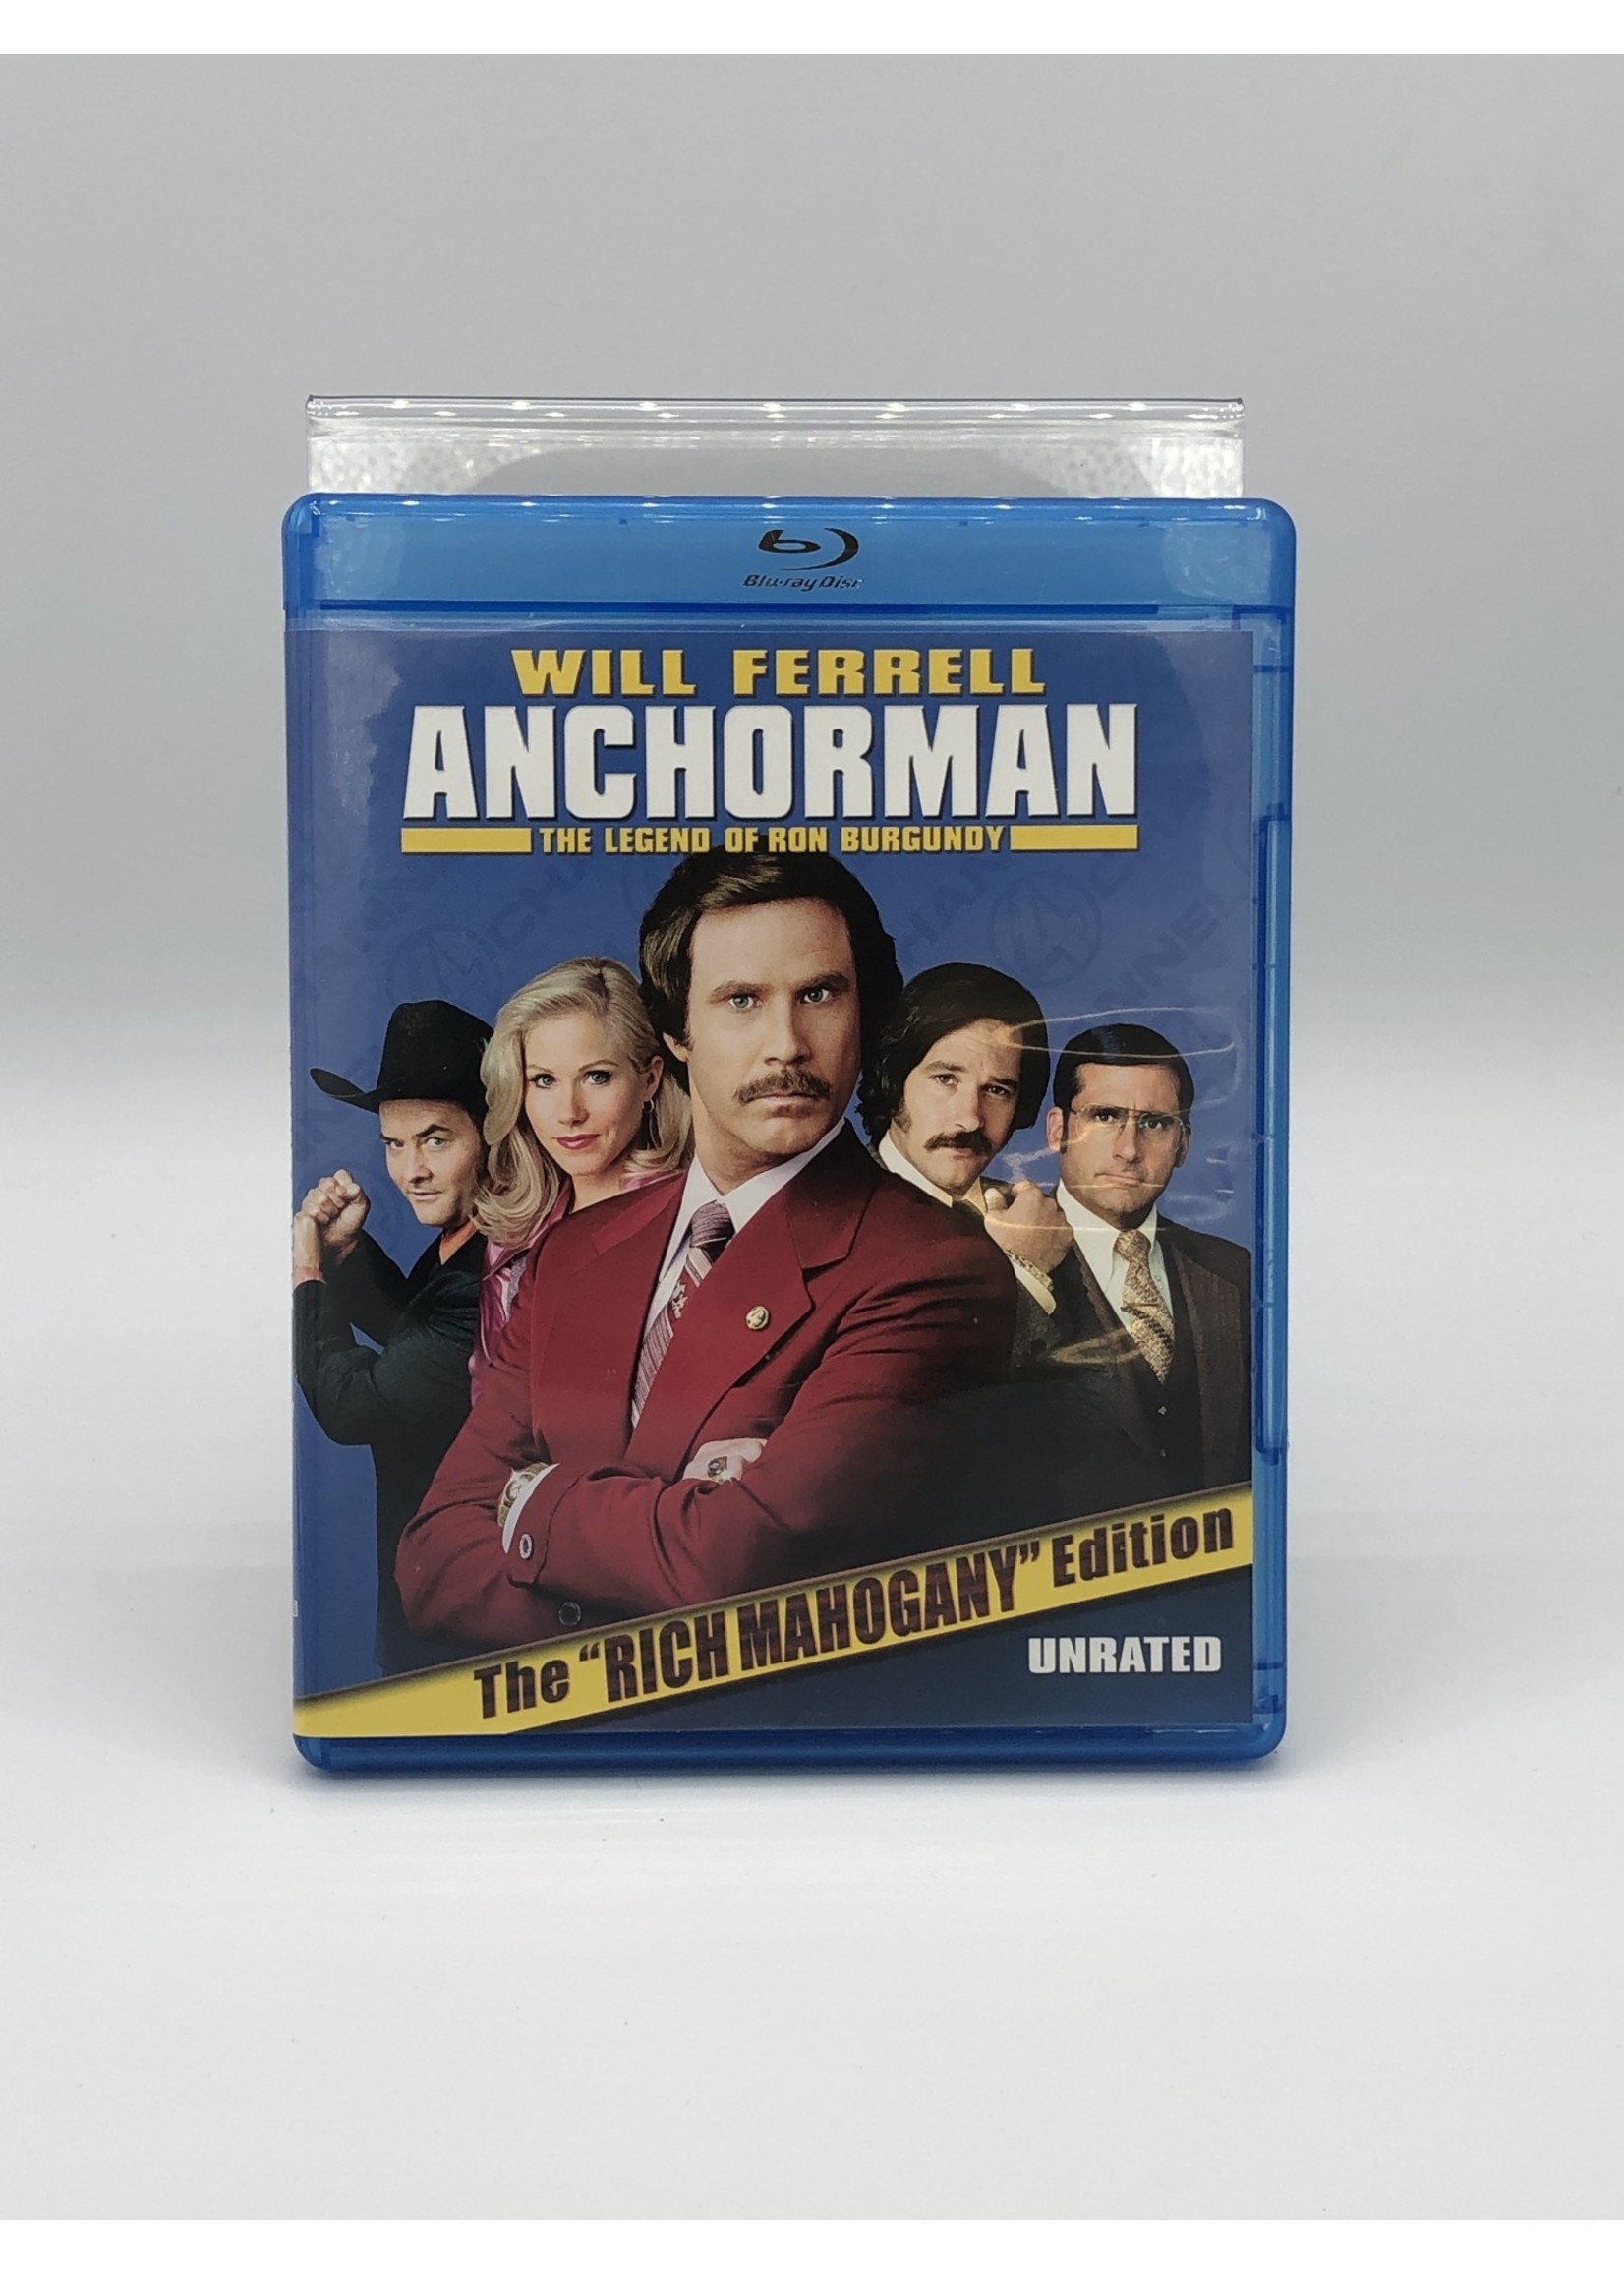 Bluray Anchorman: The Rich Mahogany Edition Unrated Bluray